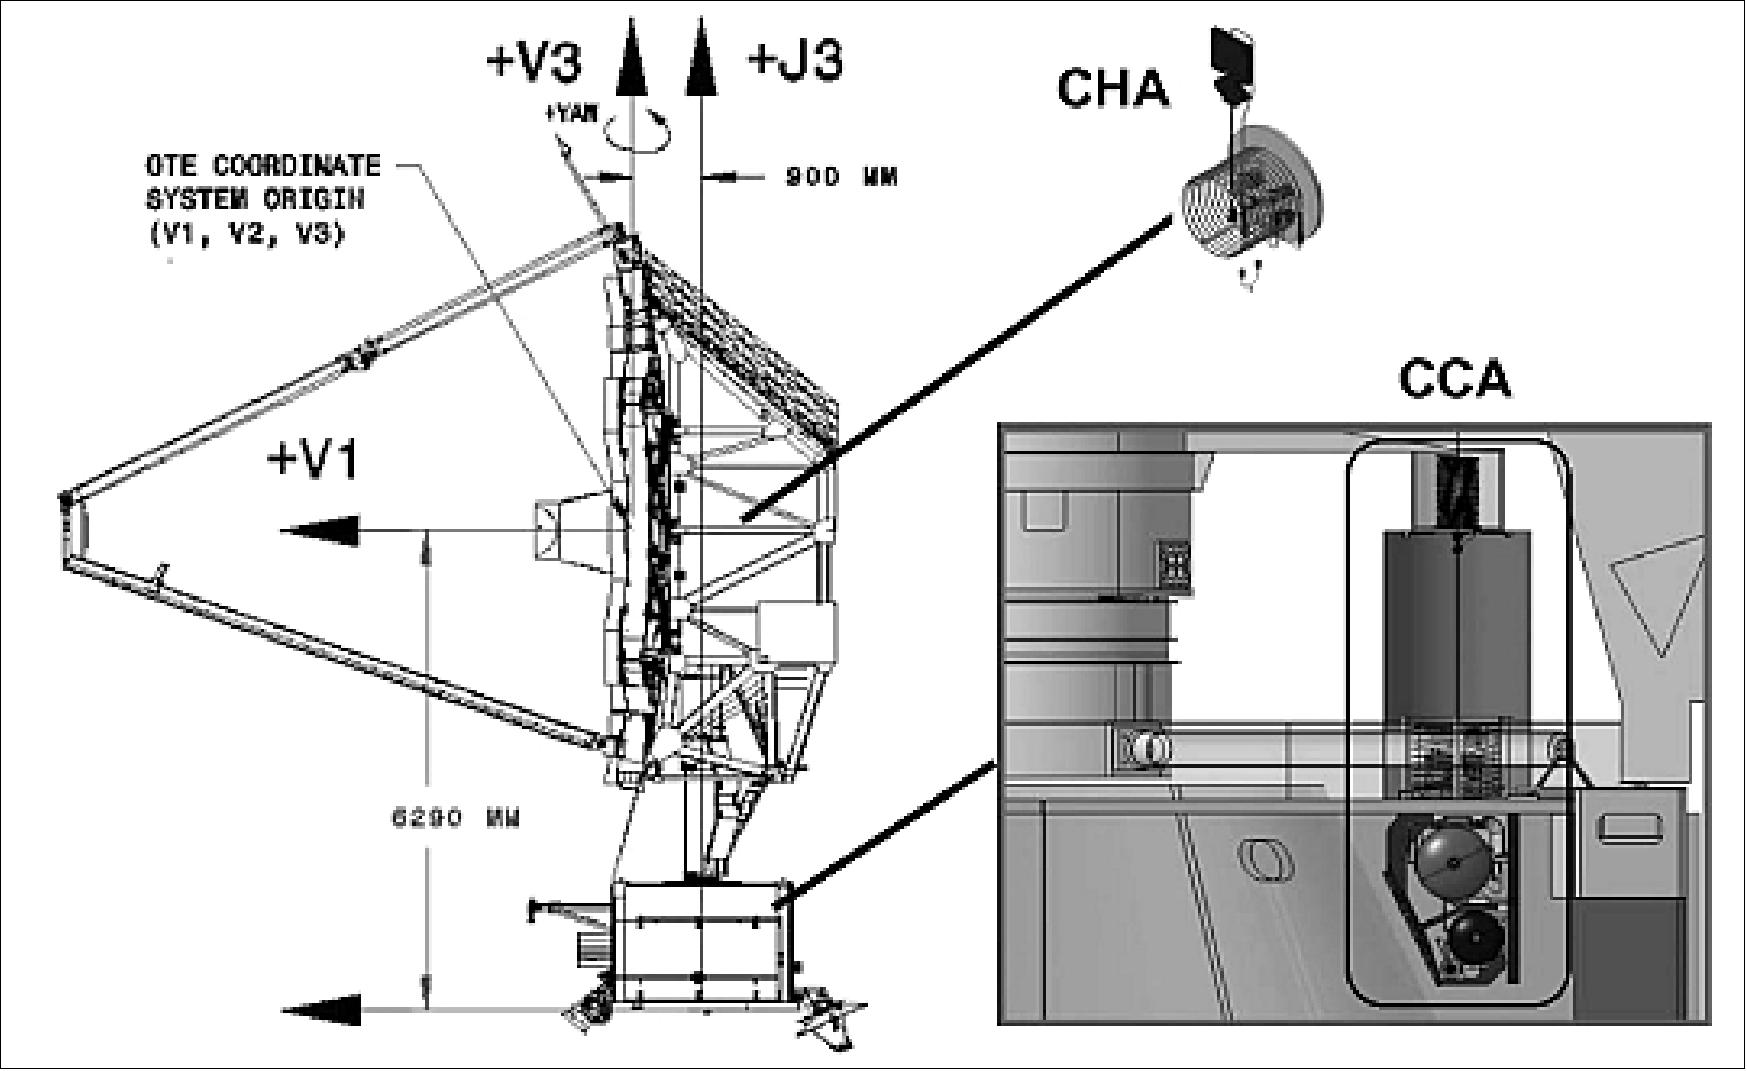 Figure 87: Schematic view of the distributed MIRI cryocooler subsystem (image credit: NGAS)